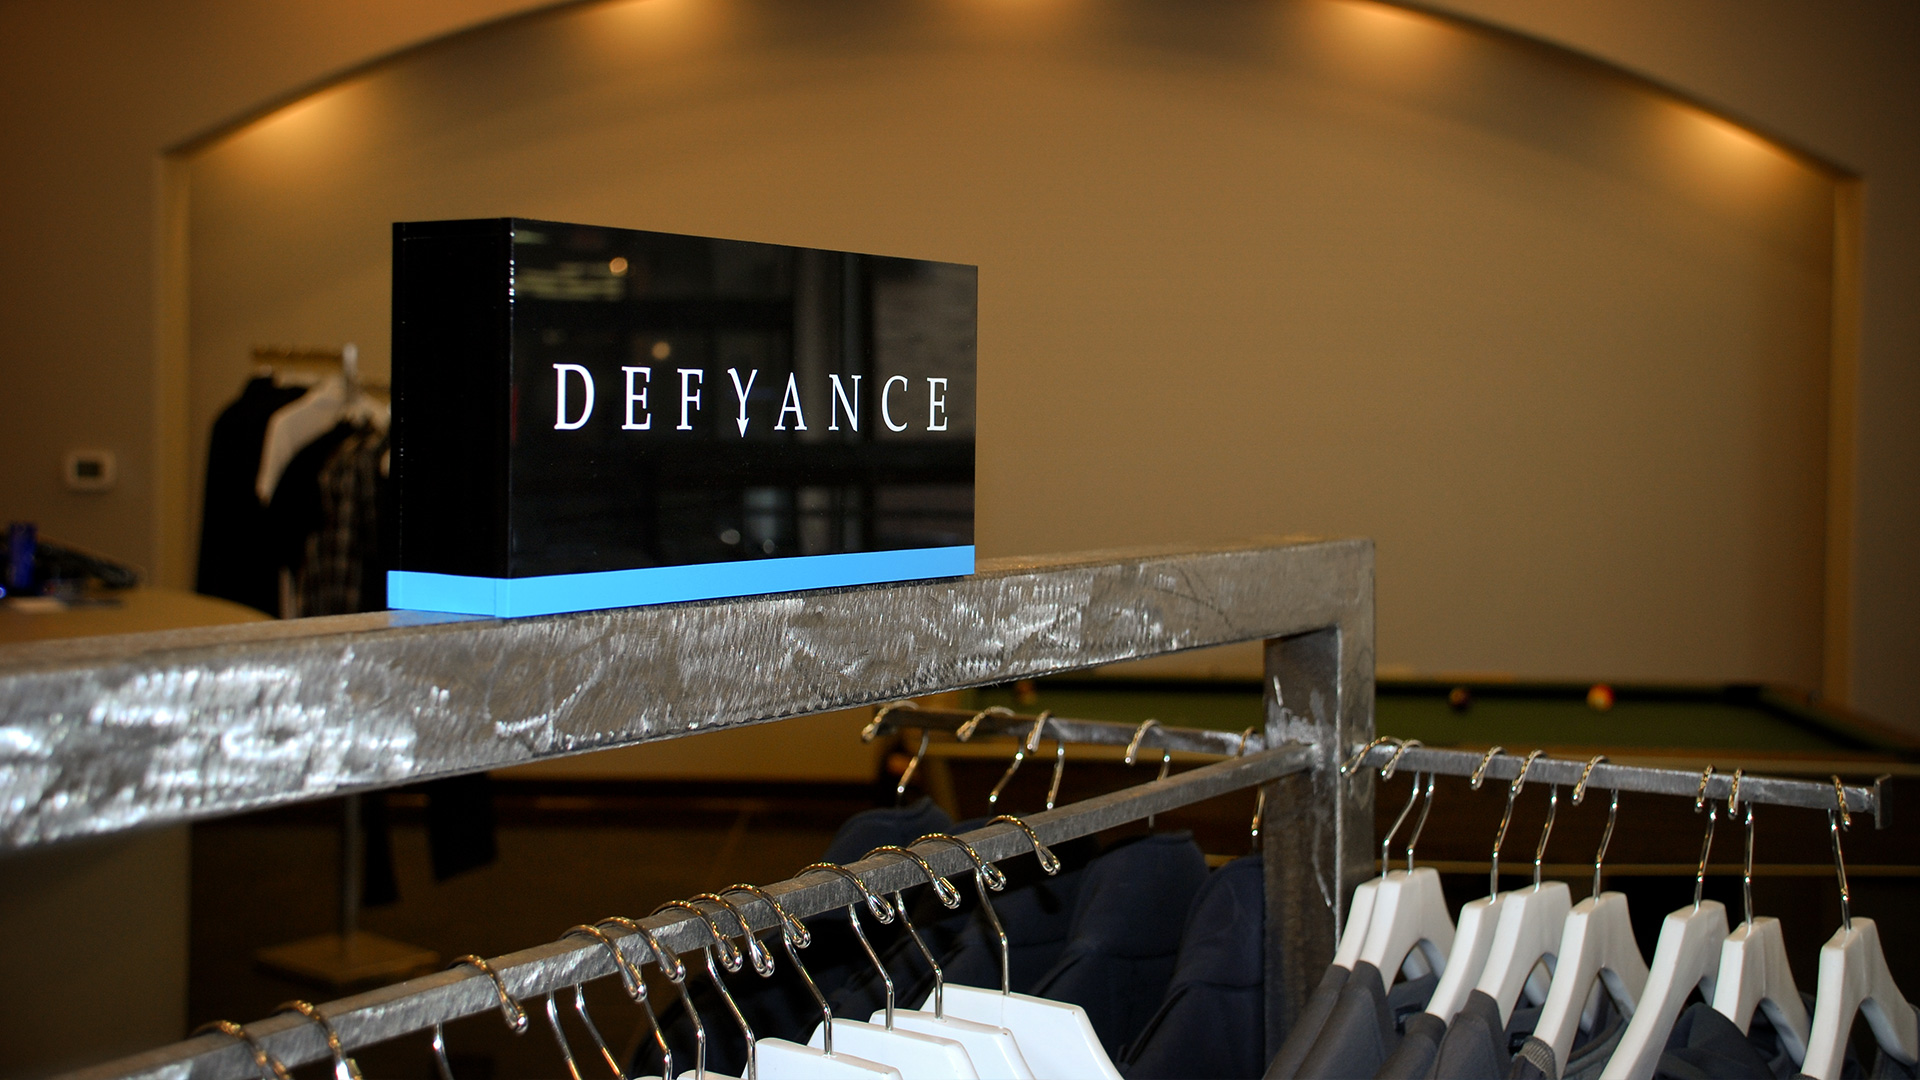 Defyance logo on signage in retail space